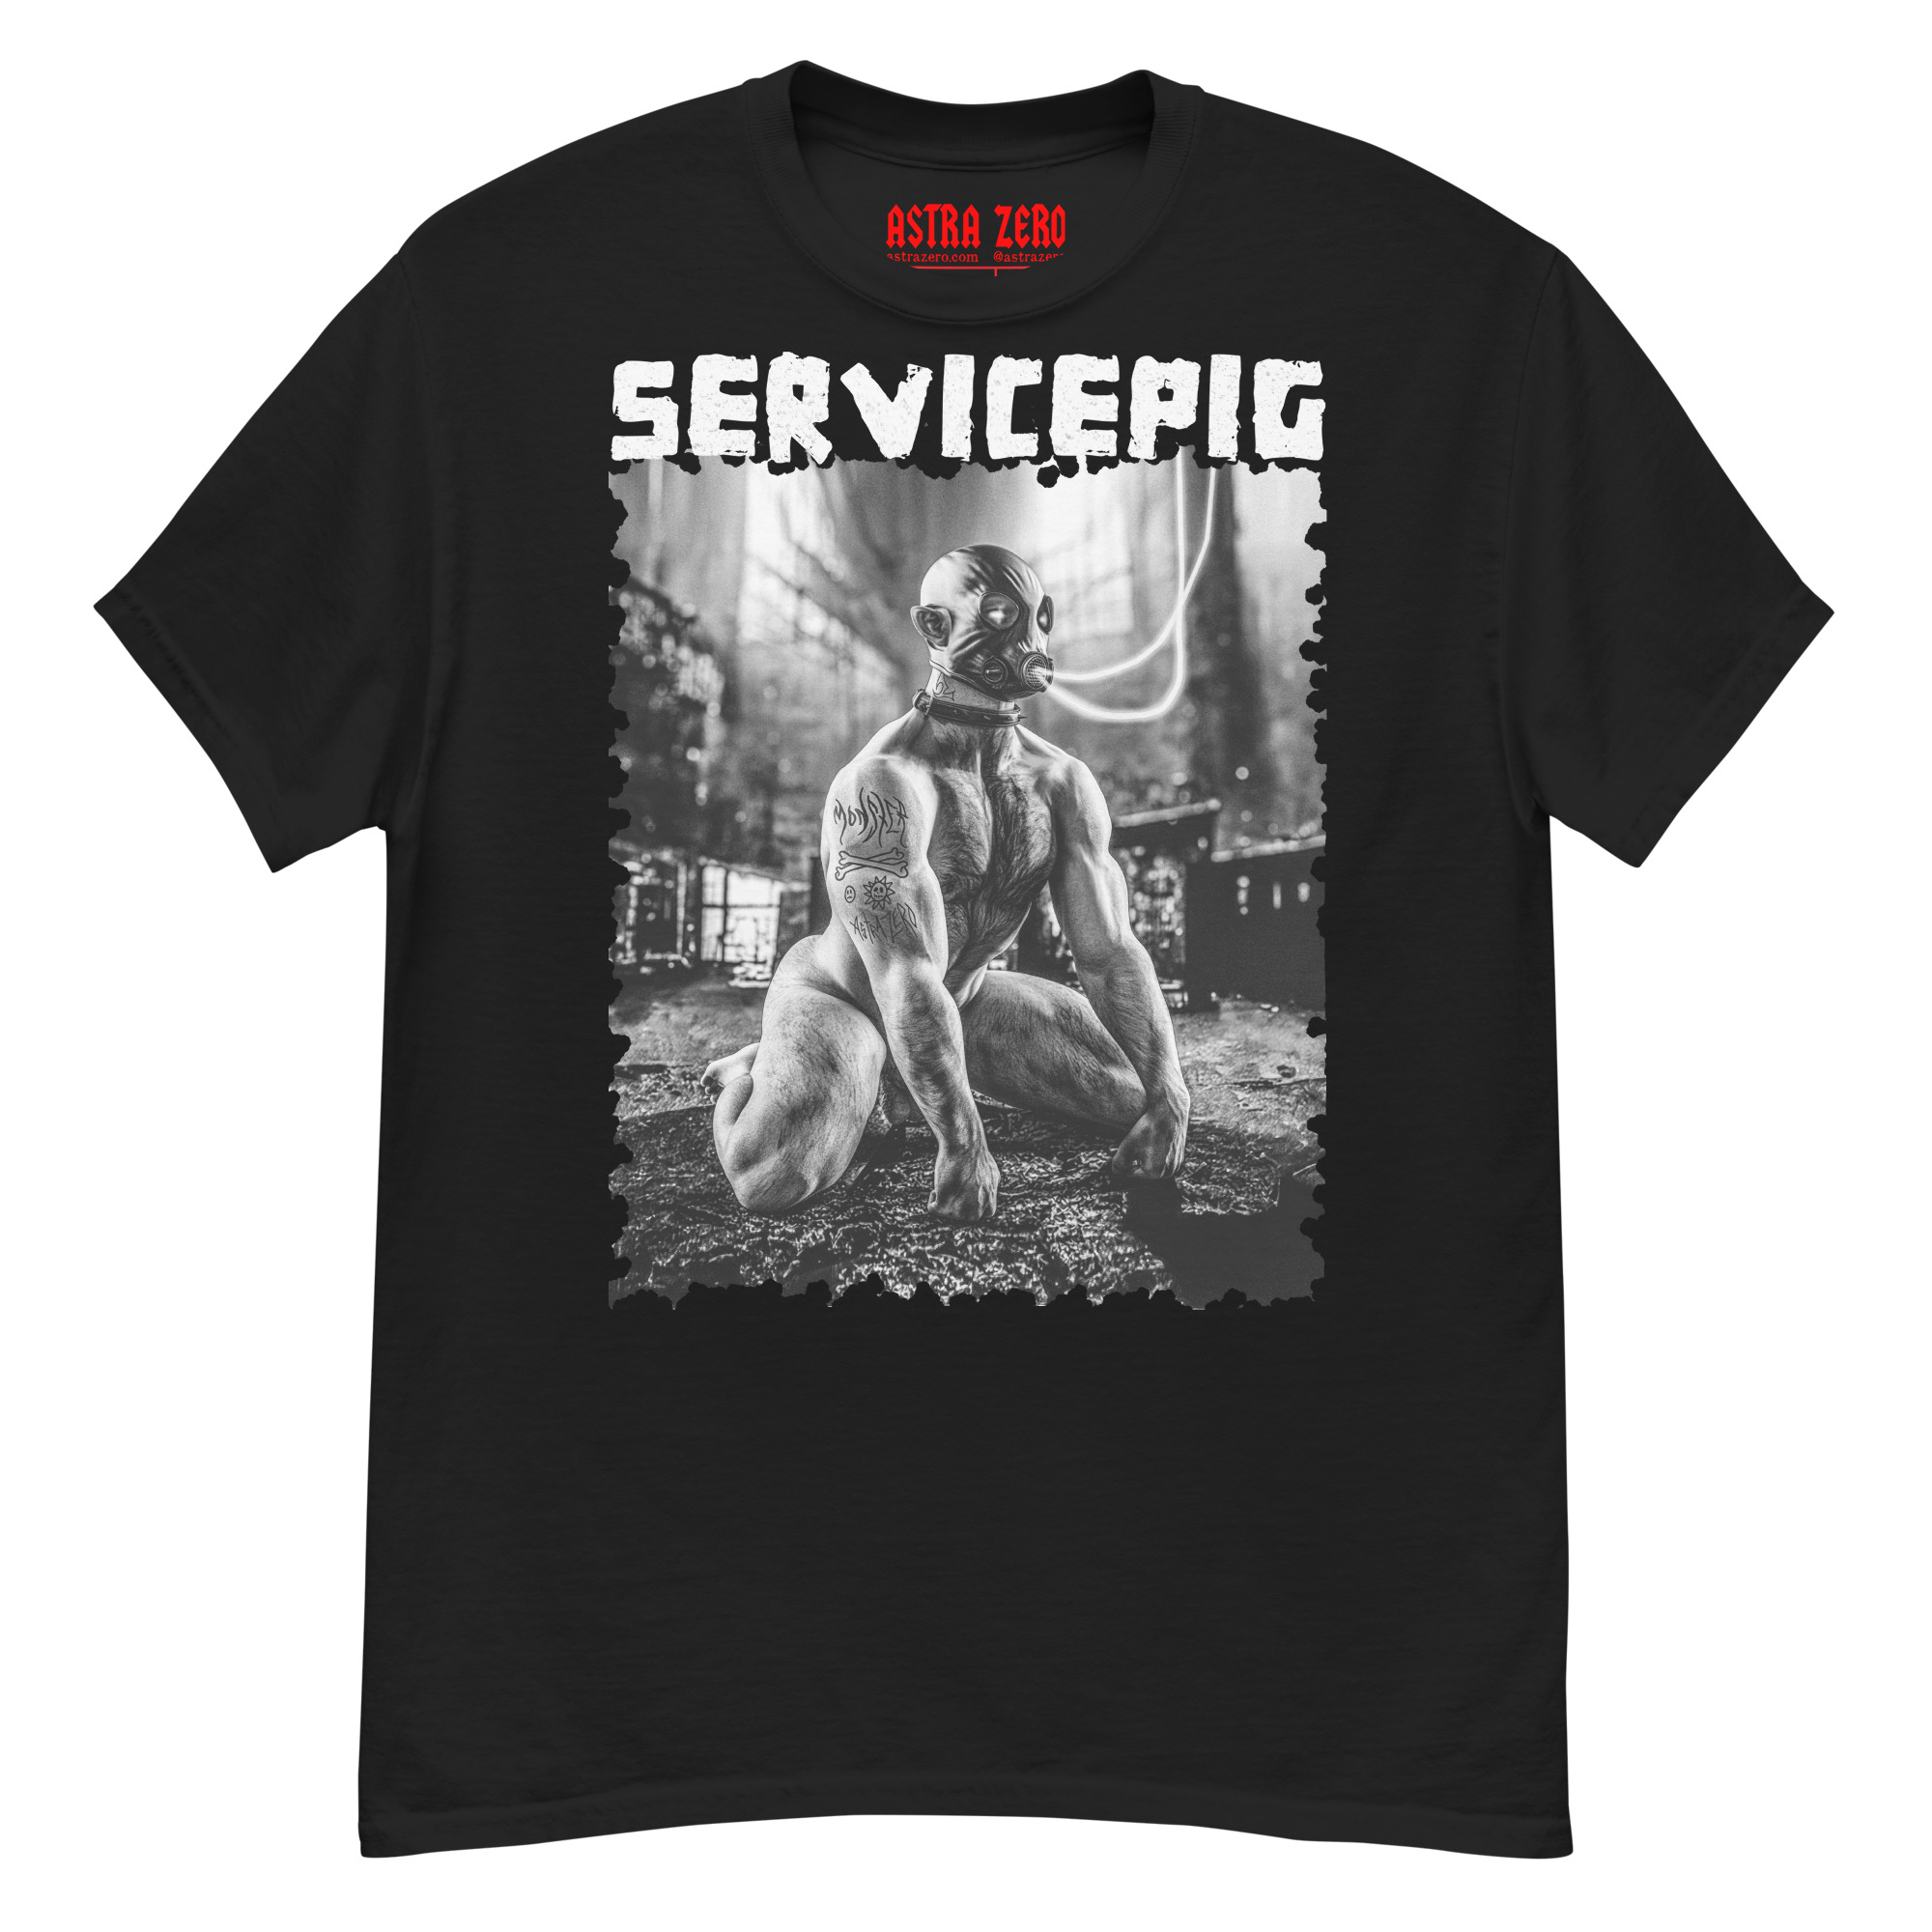 Featured image for “ServicePig - Men's classic tee”